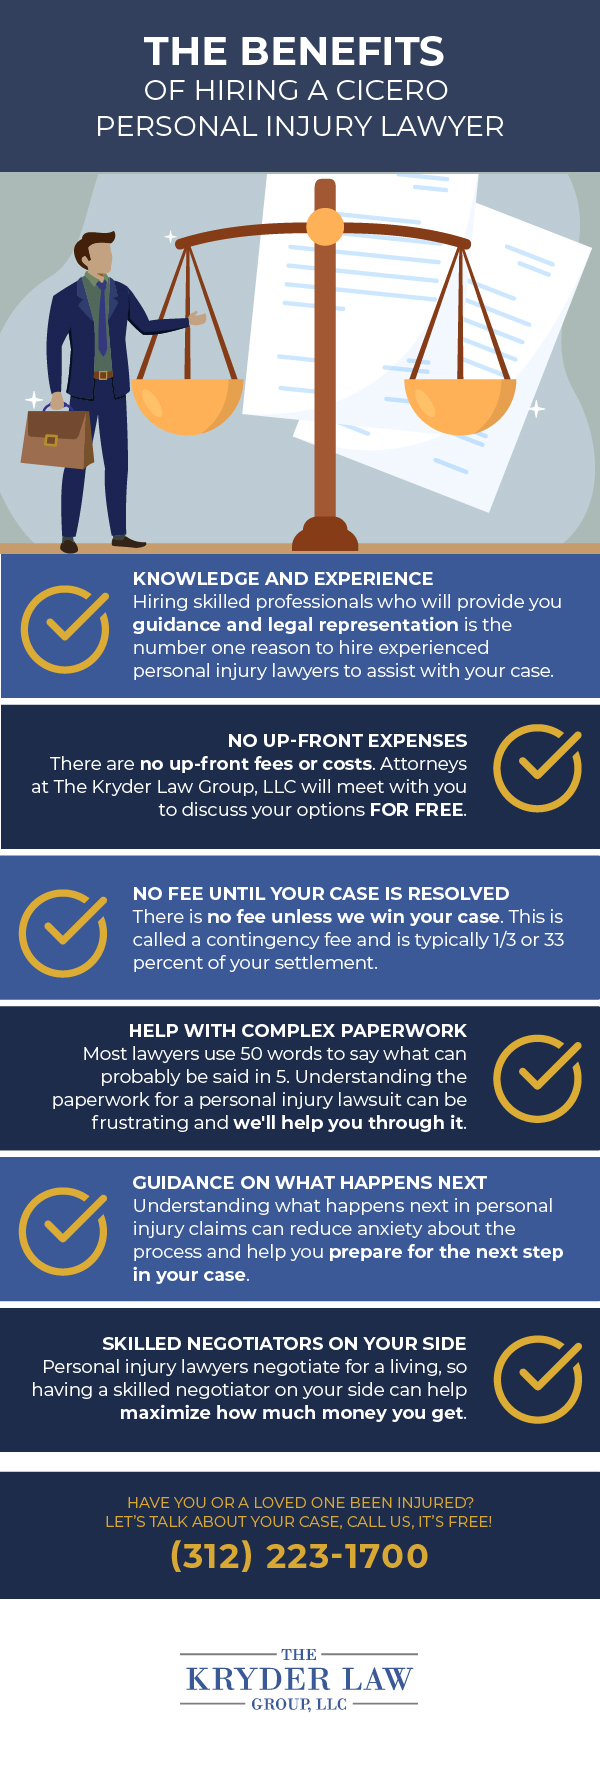 The Benefits of Hiring a Cicero Personal Injury Lawyer Infographic